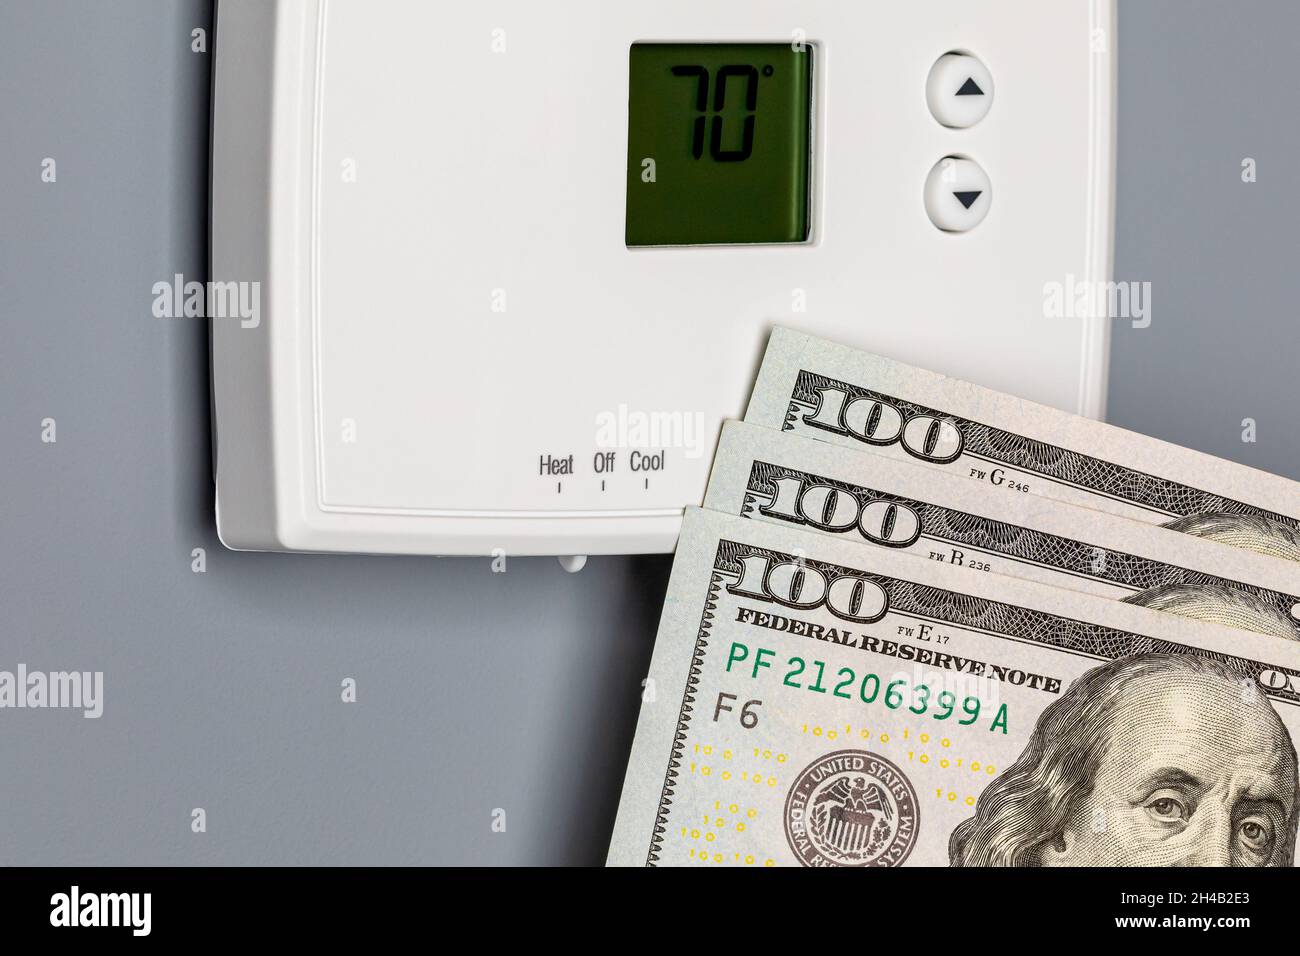 Thermostat for home furnace and air conditioner. Utility bill savings, energy cost and conservation concept Stock Photo